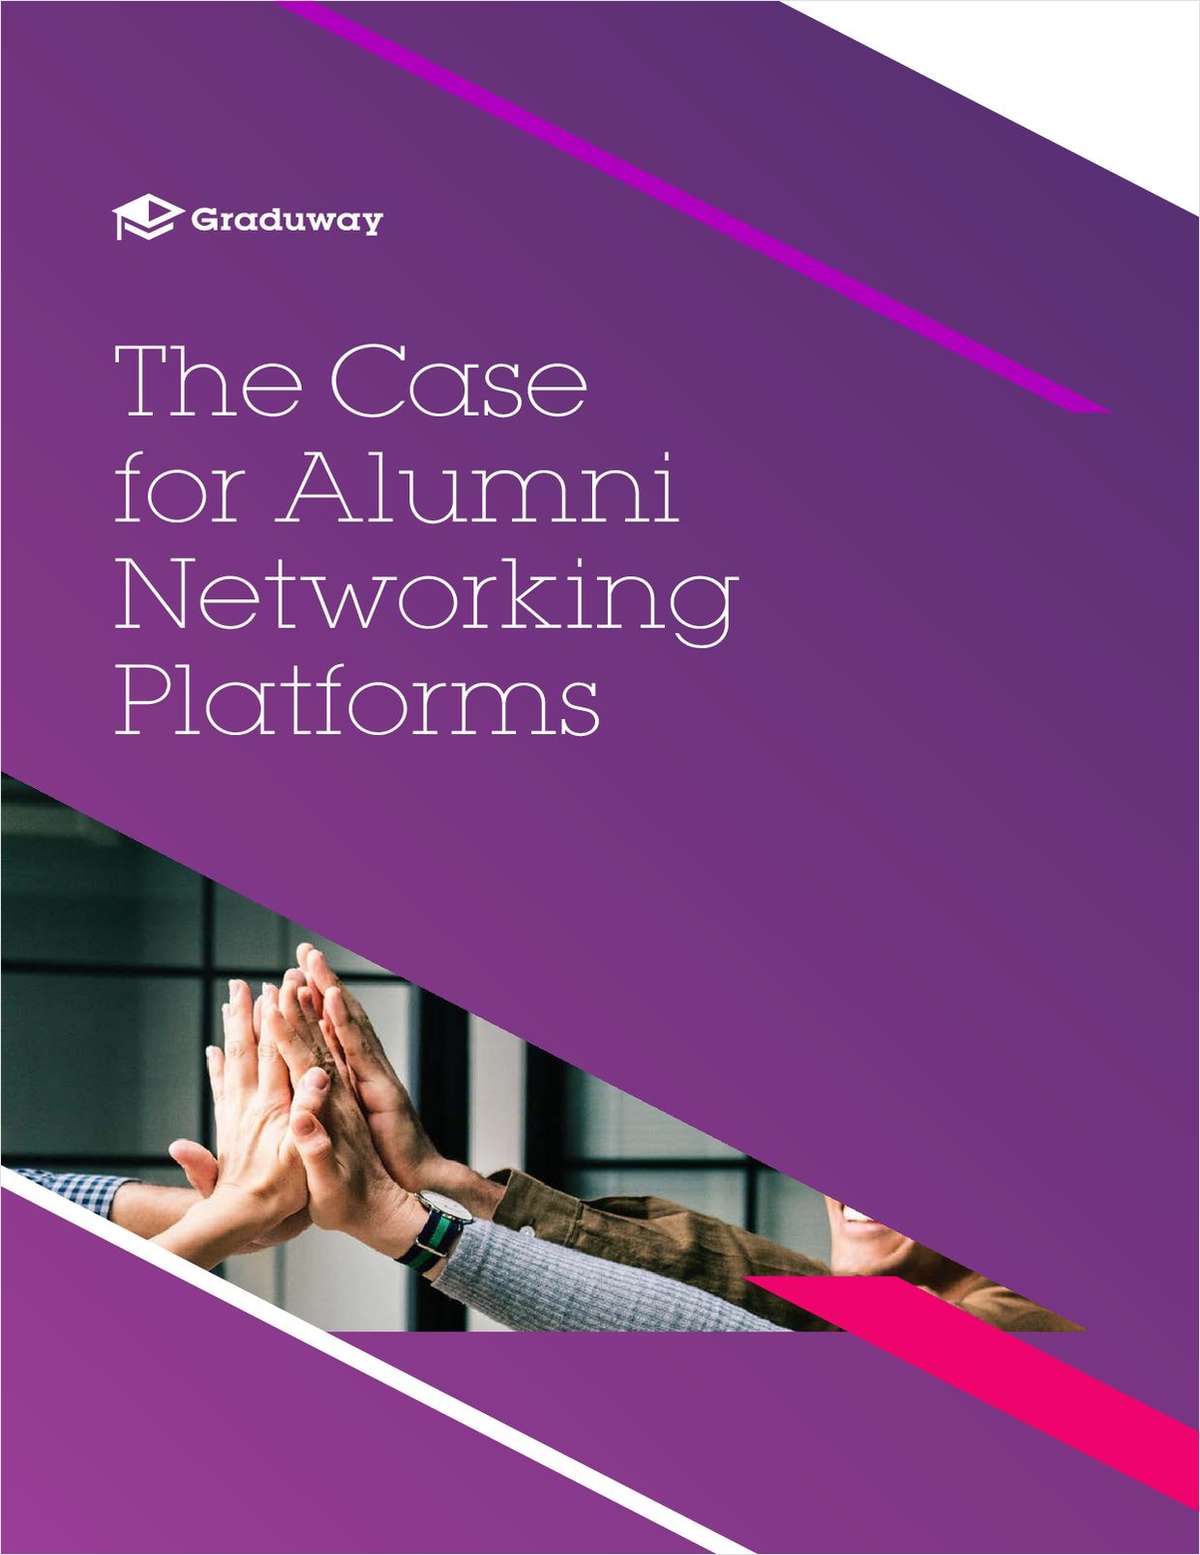 The Case for Alumni Networking Platforms